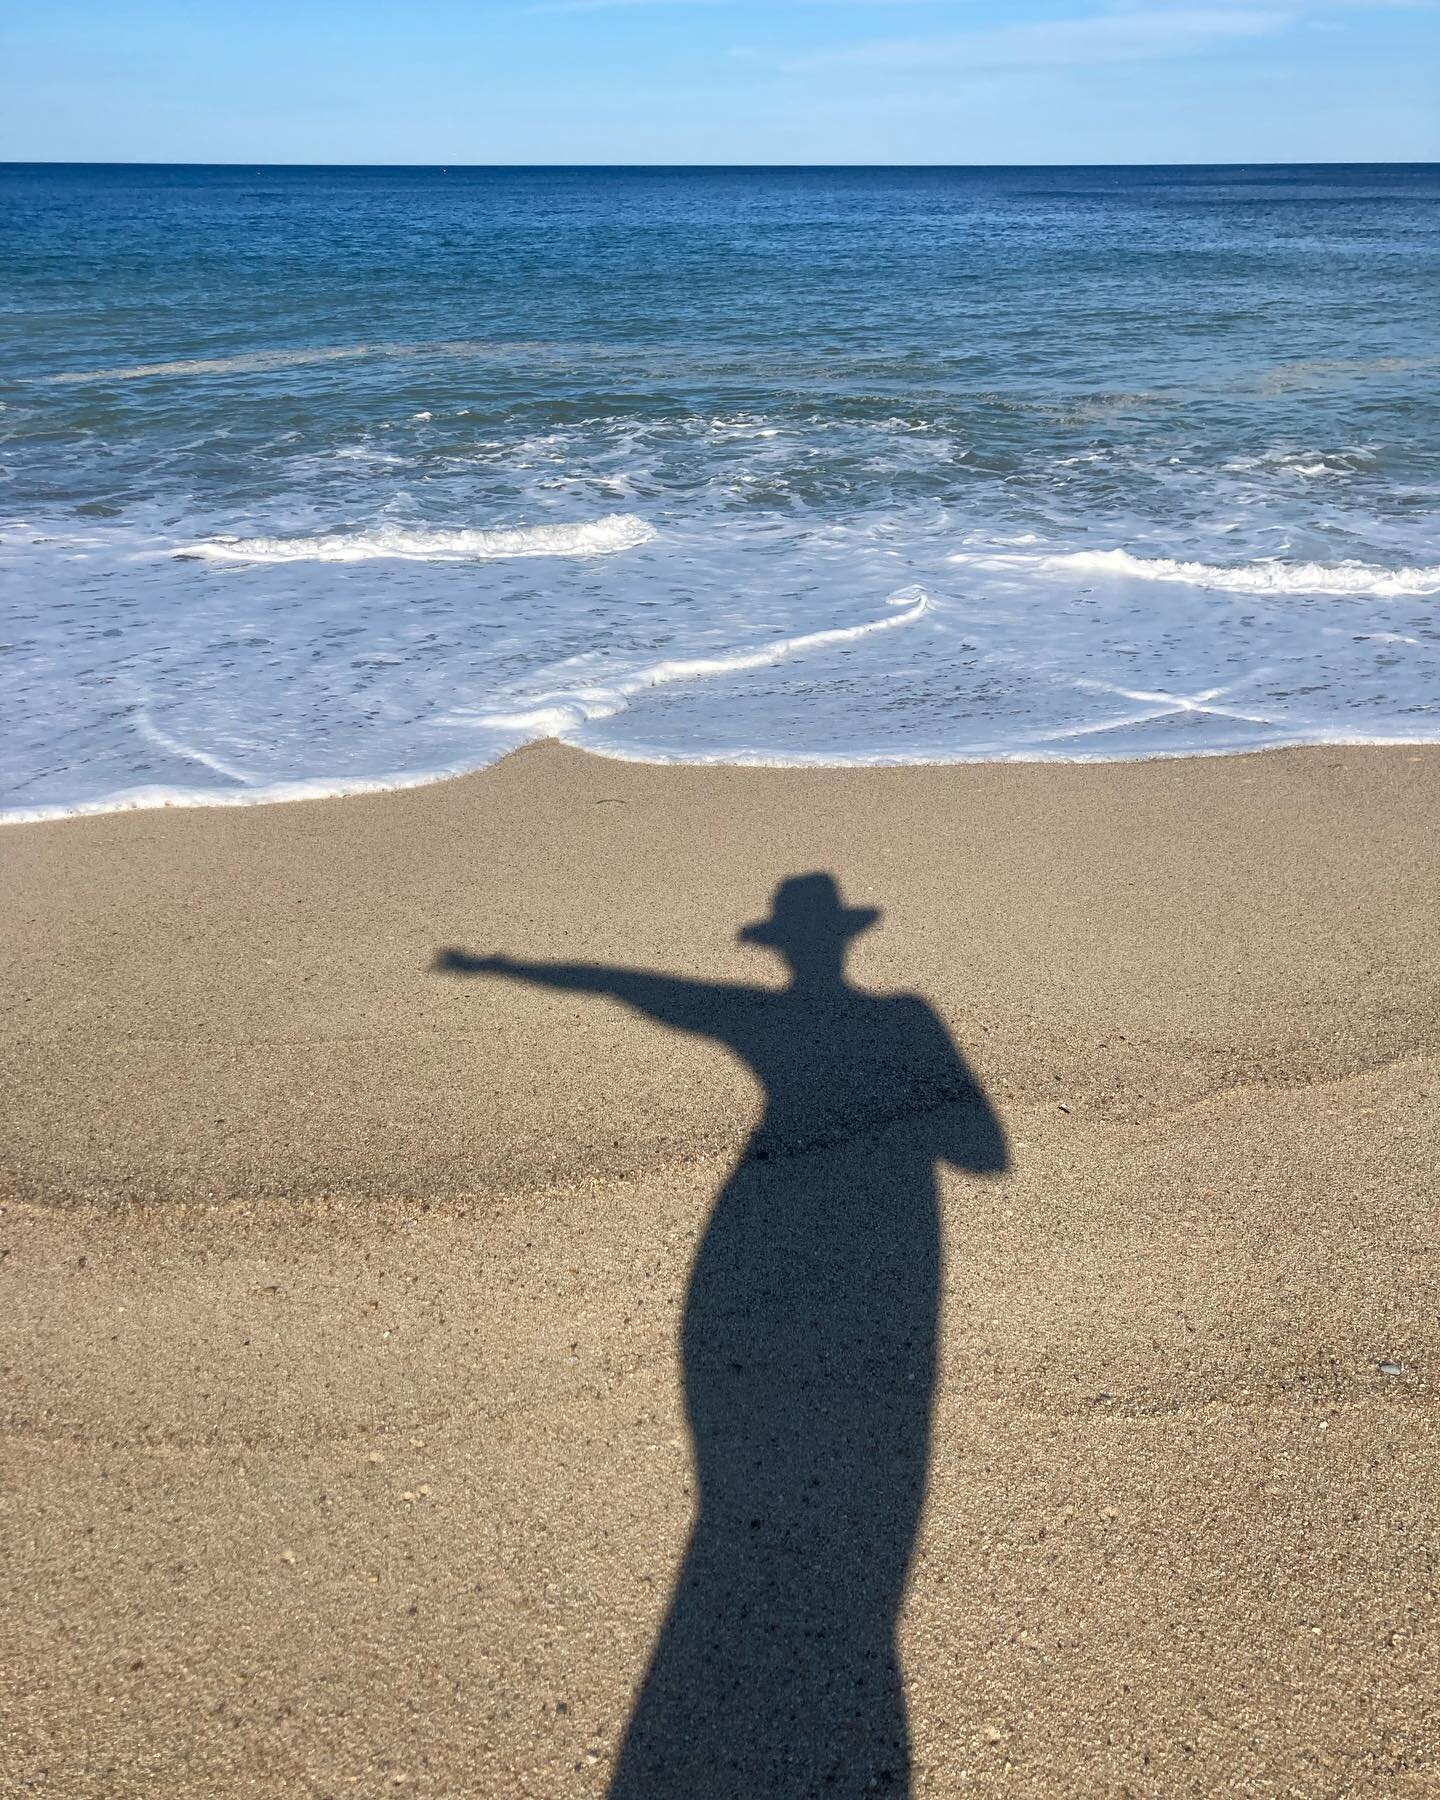 Shadow Dancing on an Empty Beach. The angle of the afternoon sun, the pure sounds of the ocean, and the feeling of warmth on my skin all lent itself towards spontaneity. How liberating to dance among the elements and move my body freely.

Join me thi